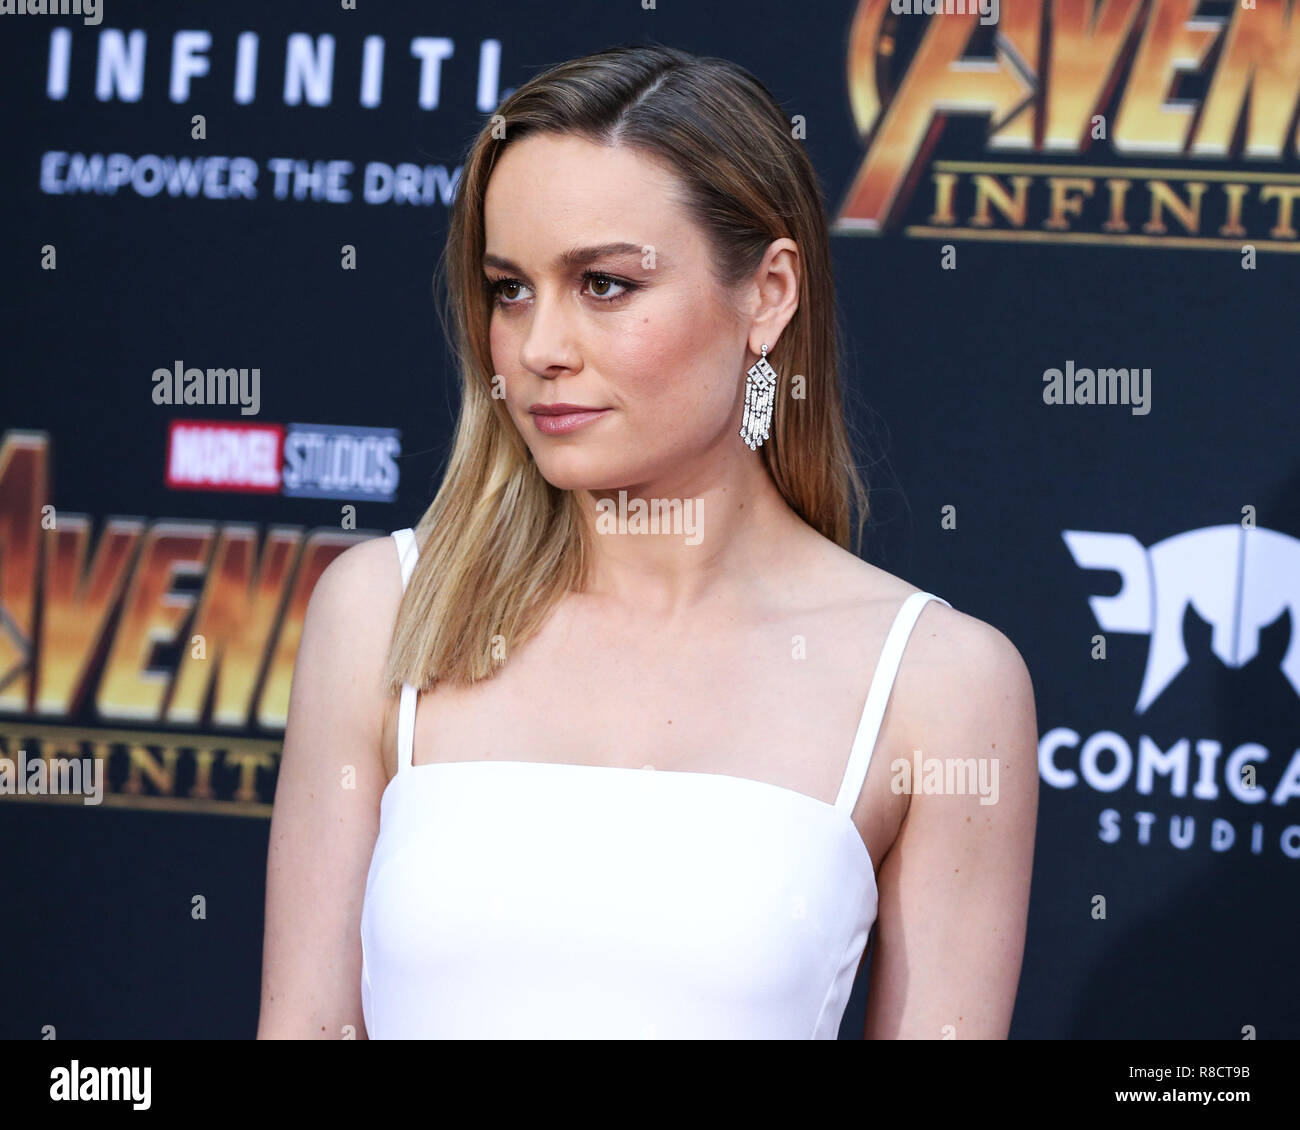 HOLLYWOOD, LOS ANGELES, CA, USA - APRIL 23: Brie Larson at the World Premiere Of Disney And Marvel's 'Avengers: Infinity War' held at the El Capitan Theatre, Dolby Theatre and TCL Chinese Theatre IMAX on April 23, 2018 in Hollywood, Los Angeles, California, United States. (Photo by Xavier Collin/Image Press Agency) Stock Photo